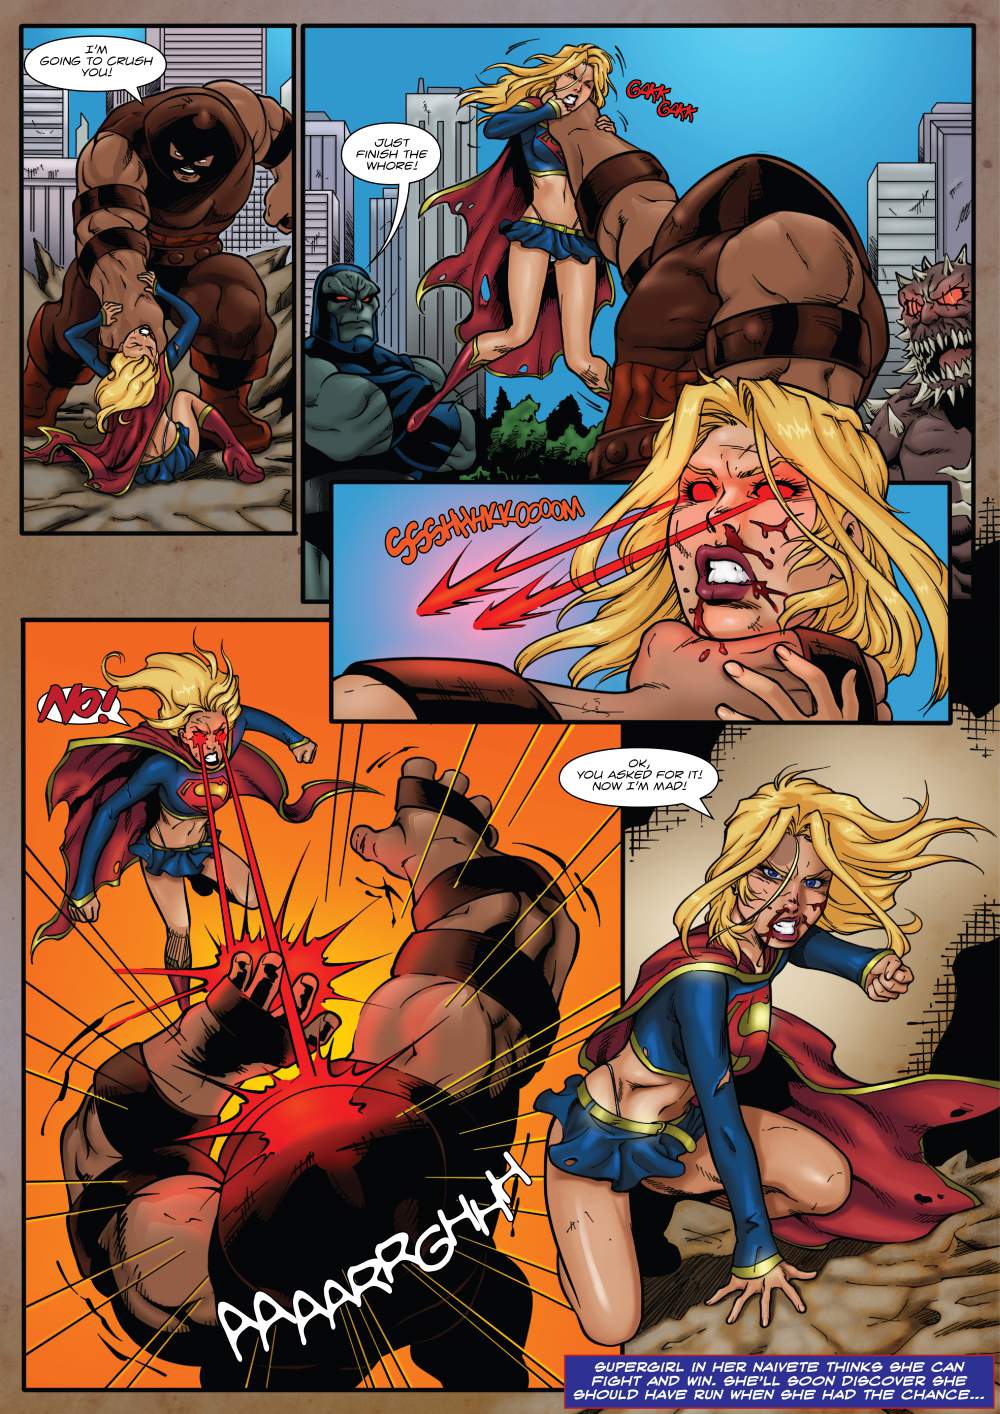 Anon2012_451144_Supergirls_Last_Stand_Page_5.jpg. 